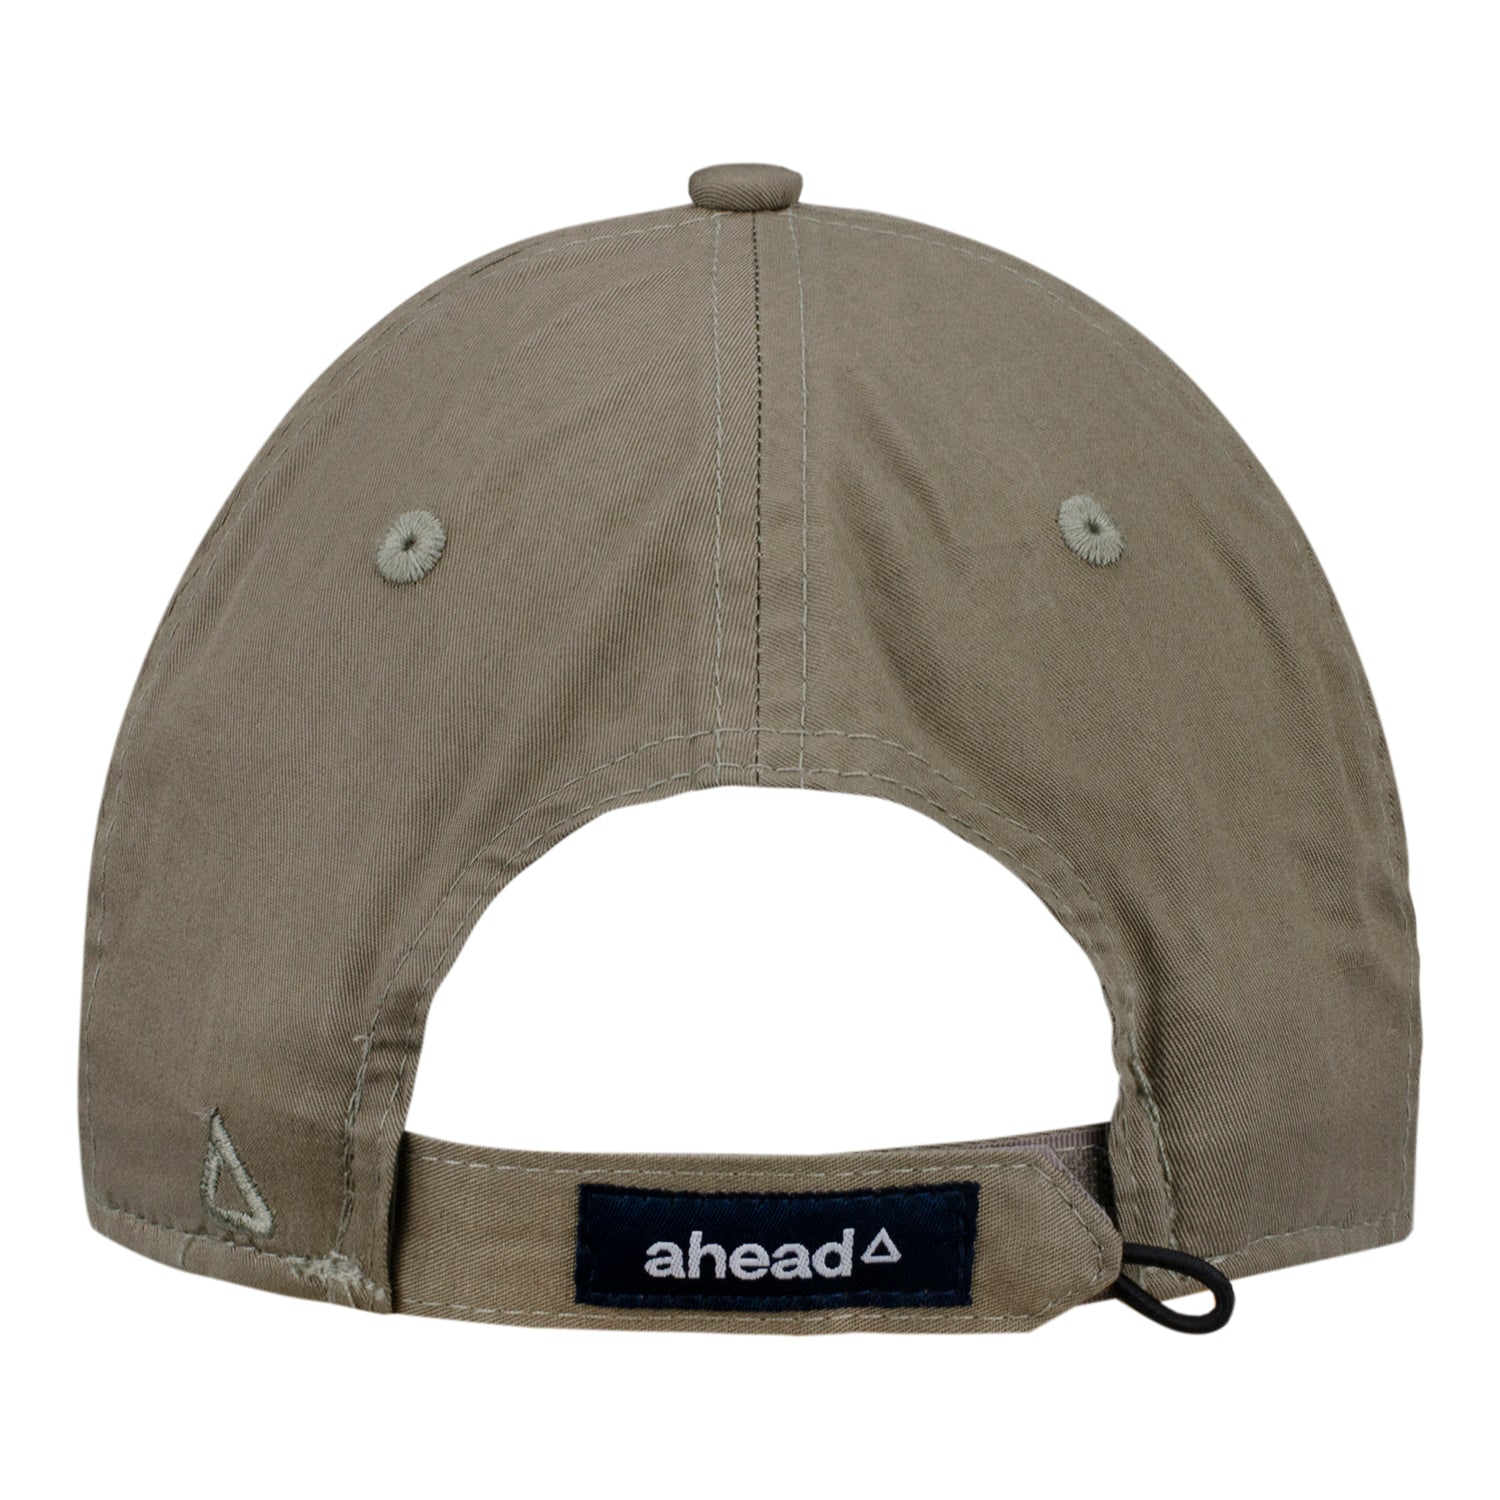 Ahead PGA HOPE Unisex Cotton Unstructured Hat in Brown - Back View